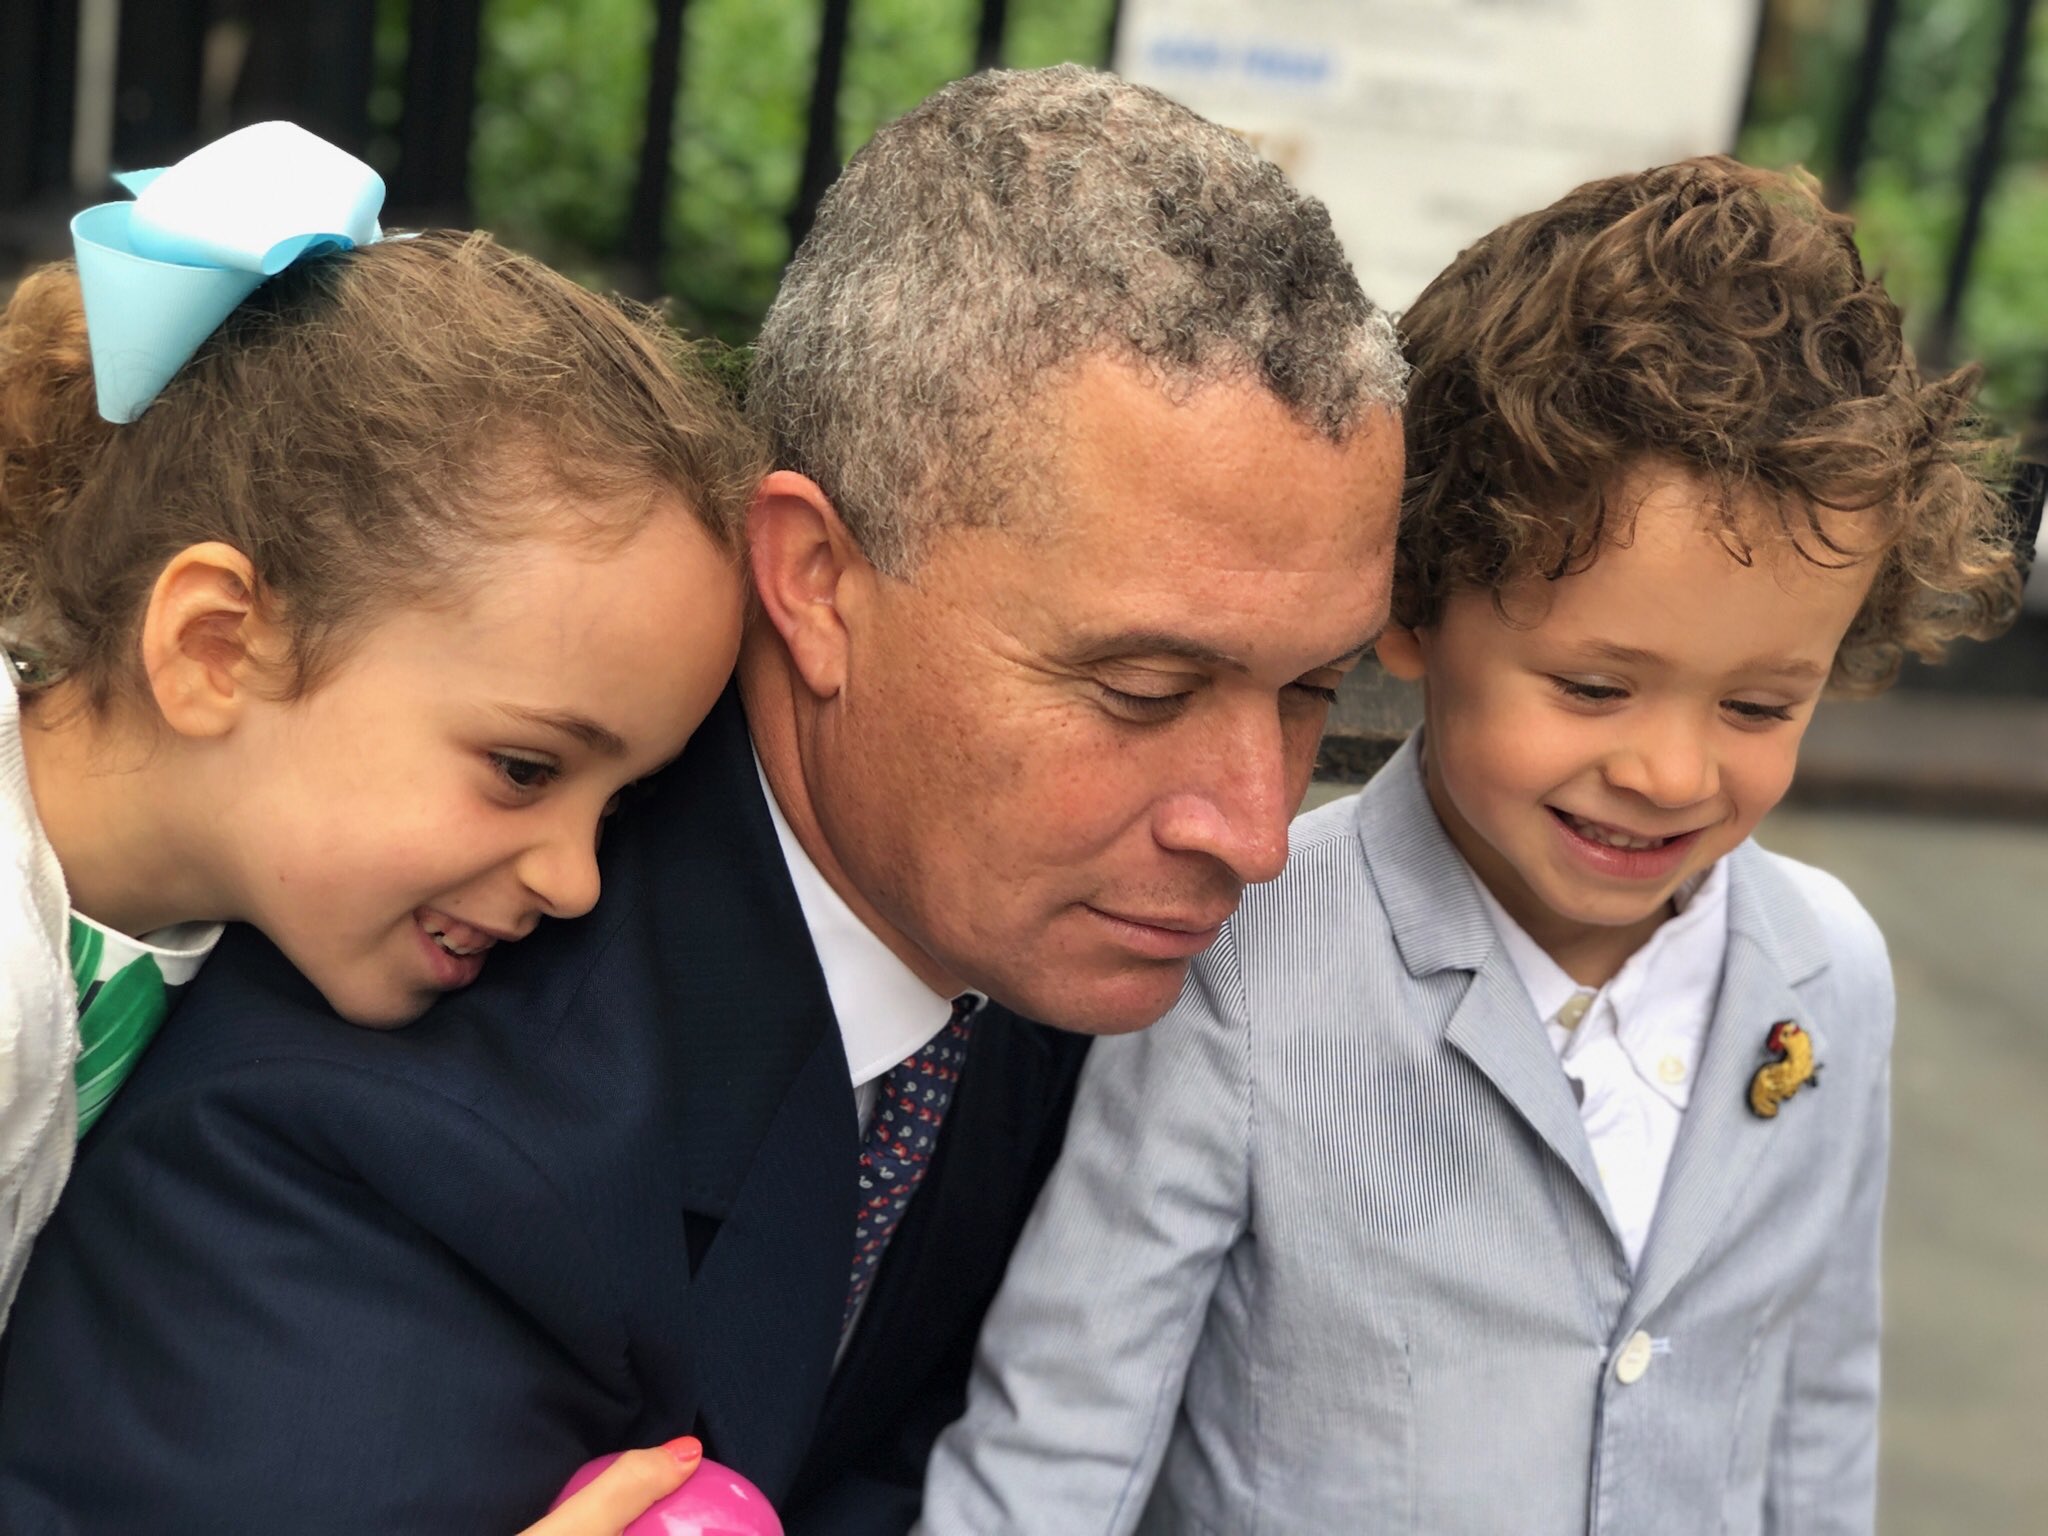 Who Is Harold Ford Jr First Wife Emily Threlkeld? Everything We Know About Harold Ford Jr First